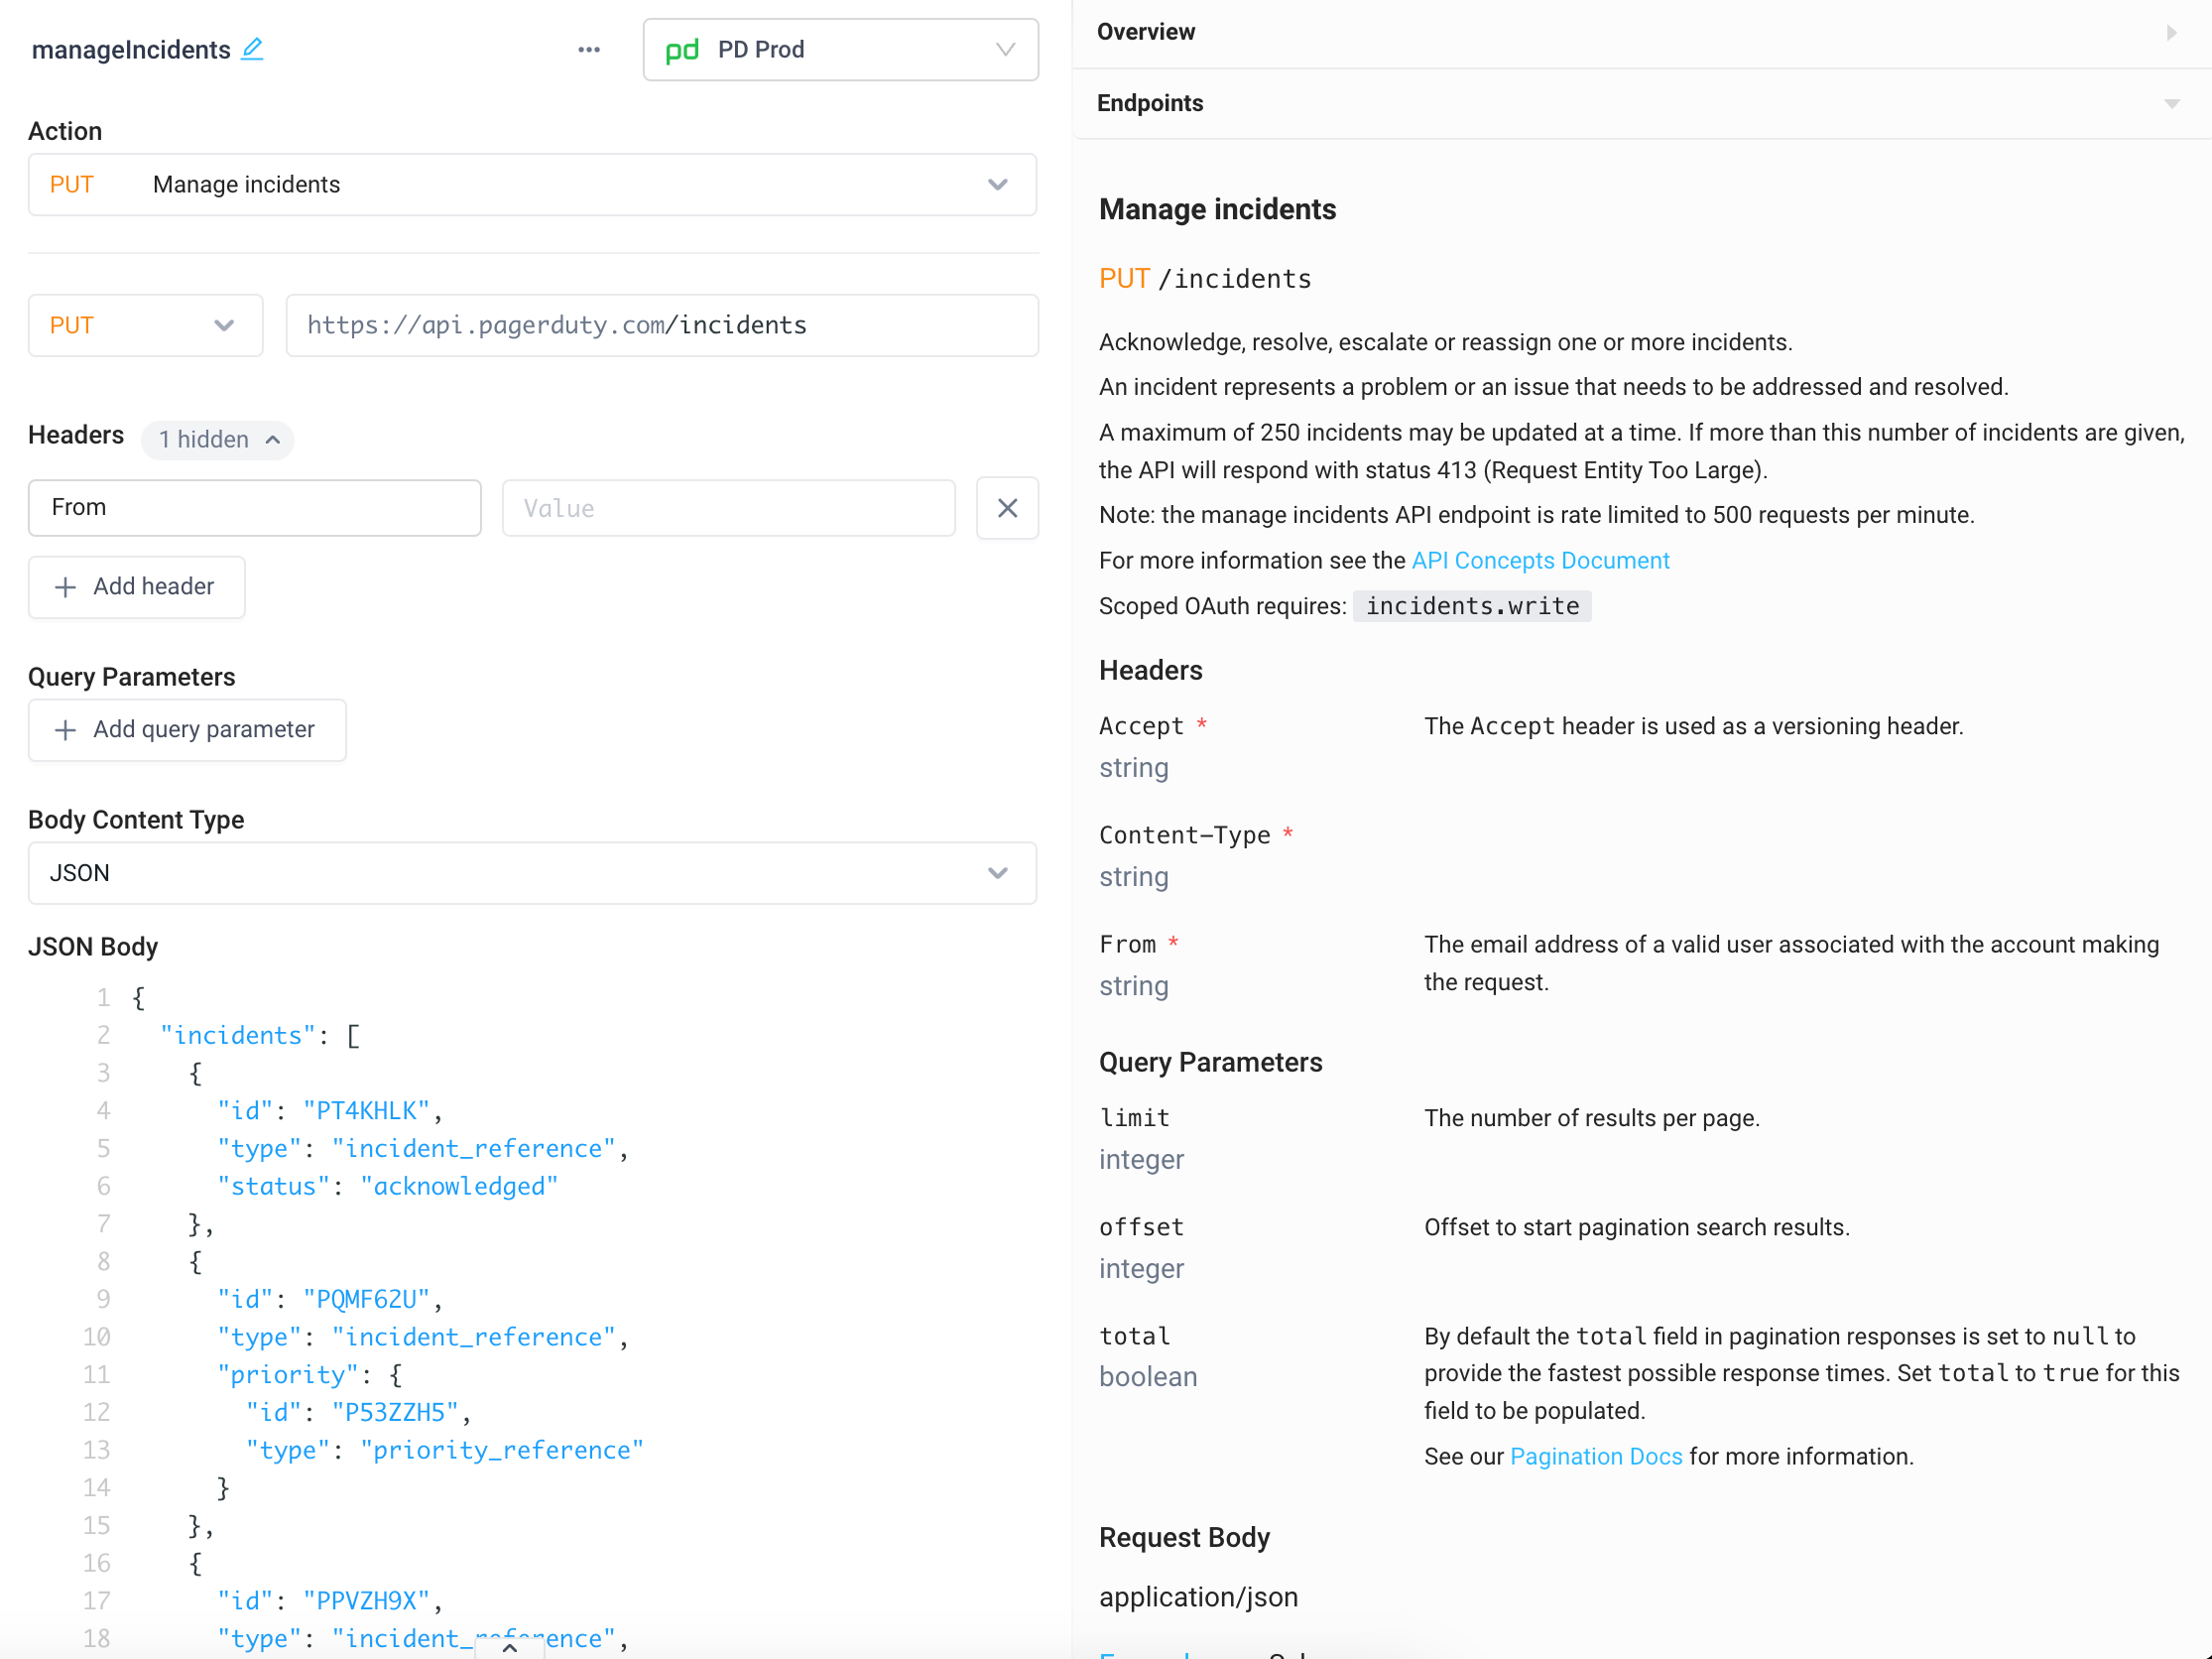 Explore the API docs side by side with creating a REST request